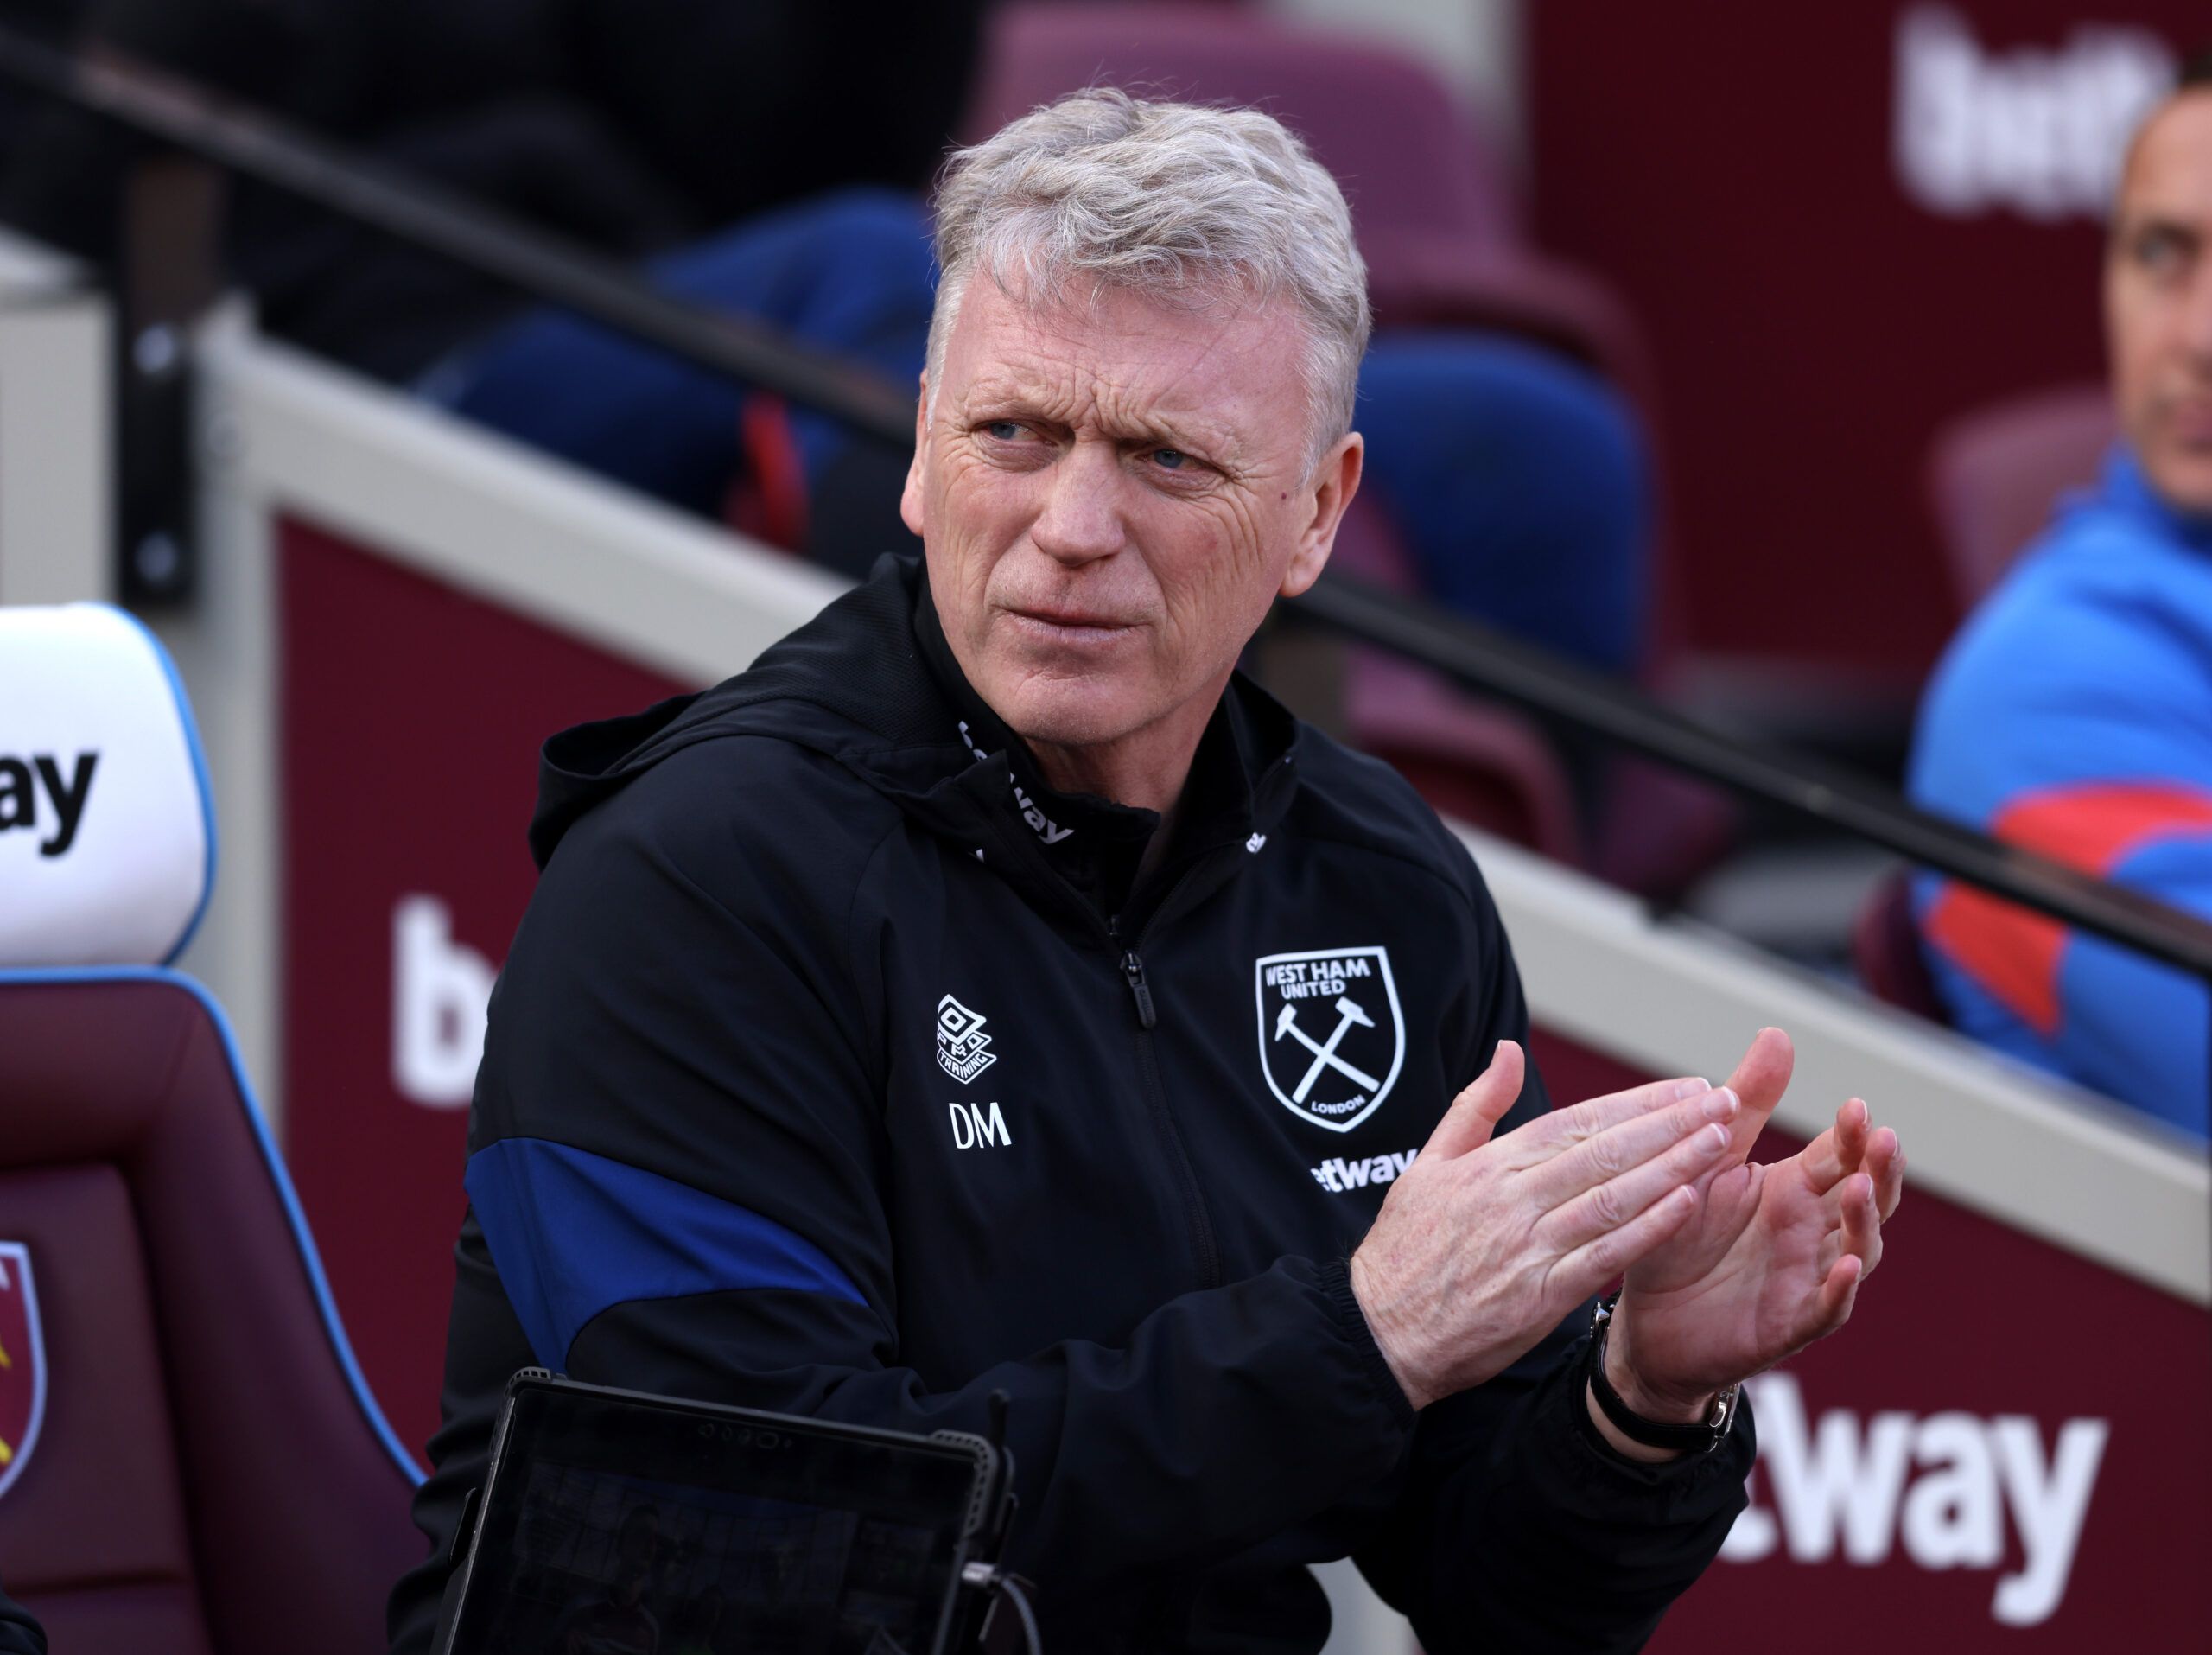 David Moyes, Manager of West Ham United looks on prior to the Premier League match between West Ham United and Wolverhampton Wanderers at London Stadium on February 27, 2022